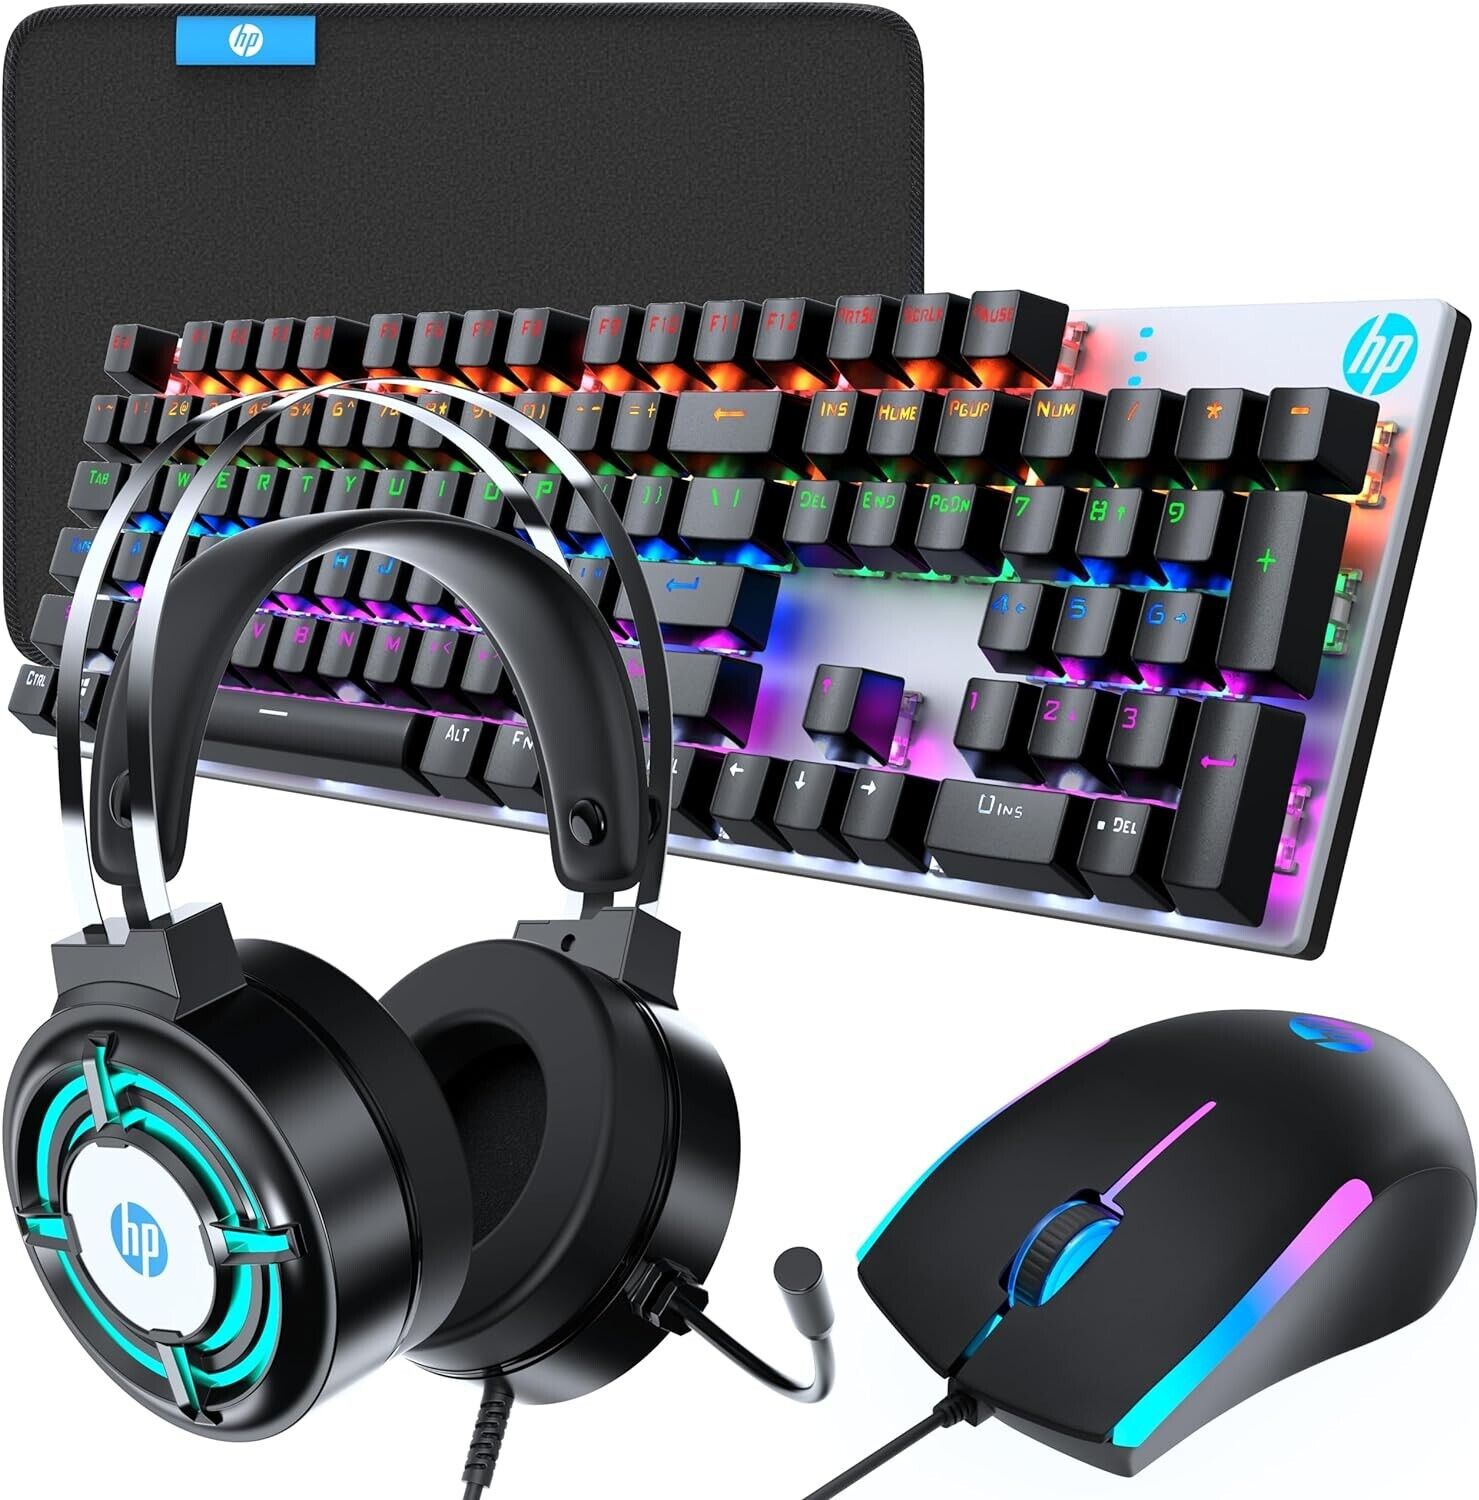 HP PC Gaming Keyboard, Mouse Pad, Gaming Headset and Mouse Combo - 4 in 1 Bundle